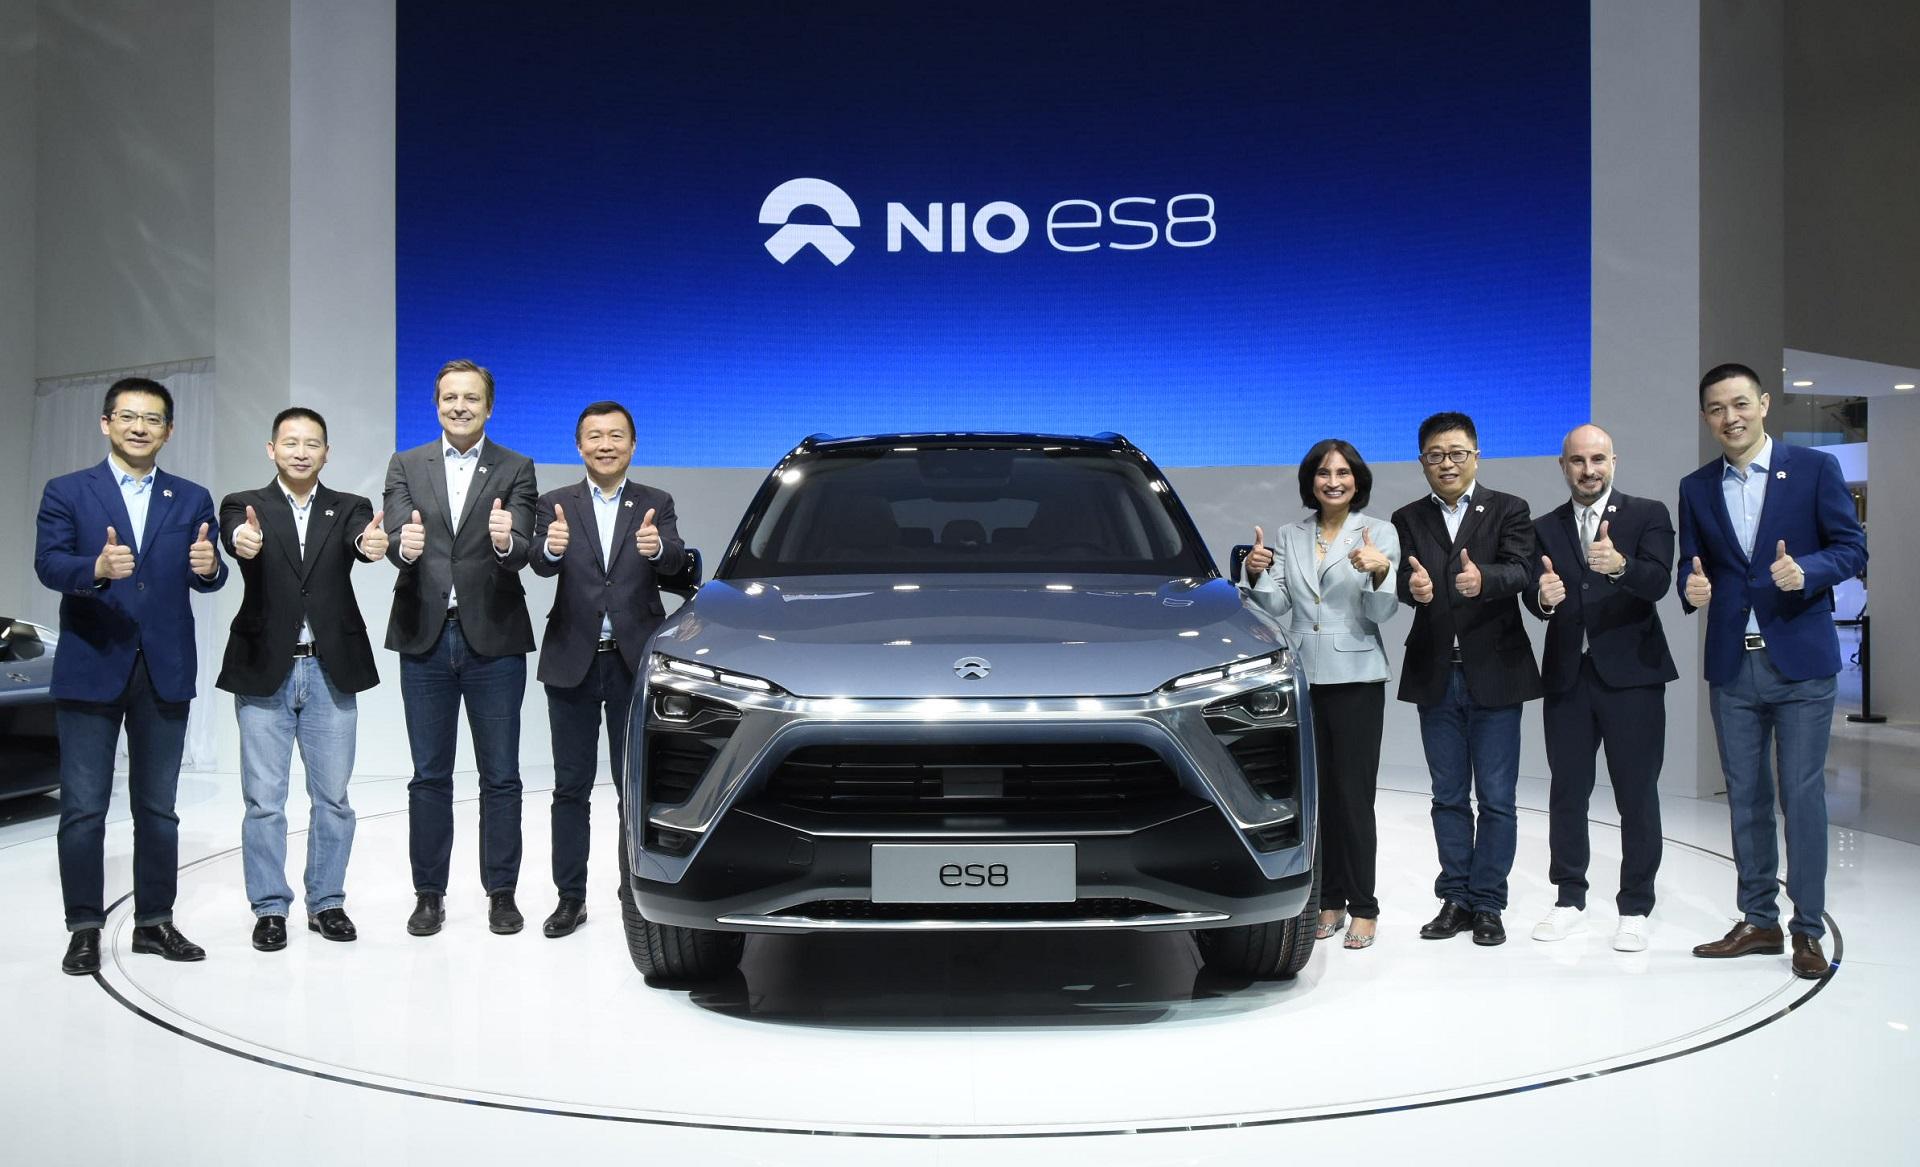 One of Tesla’s biggest investors took an 11.4% stake in rival Nio